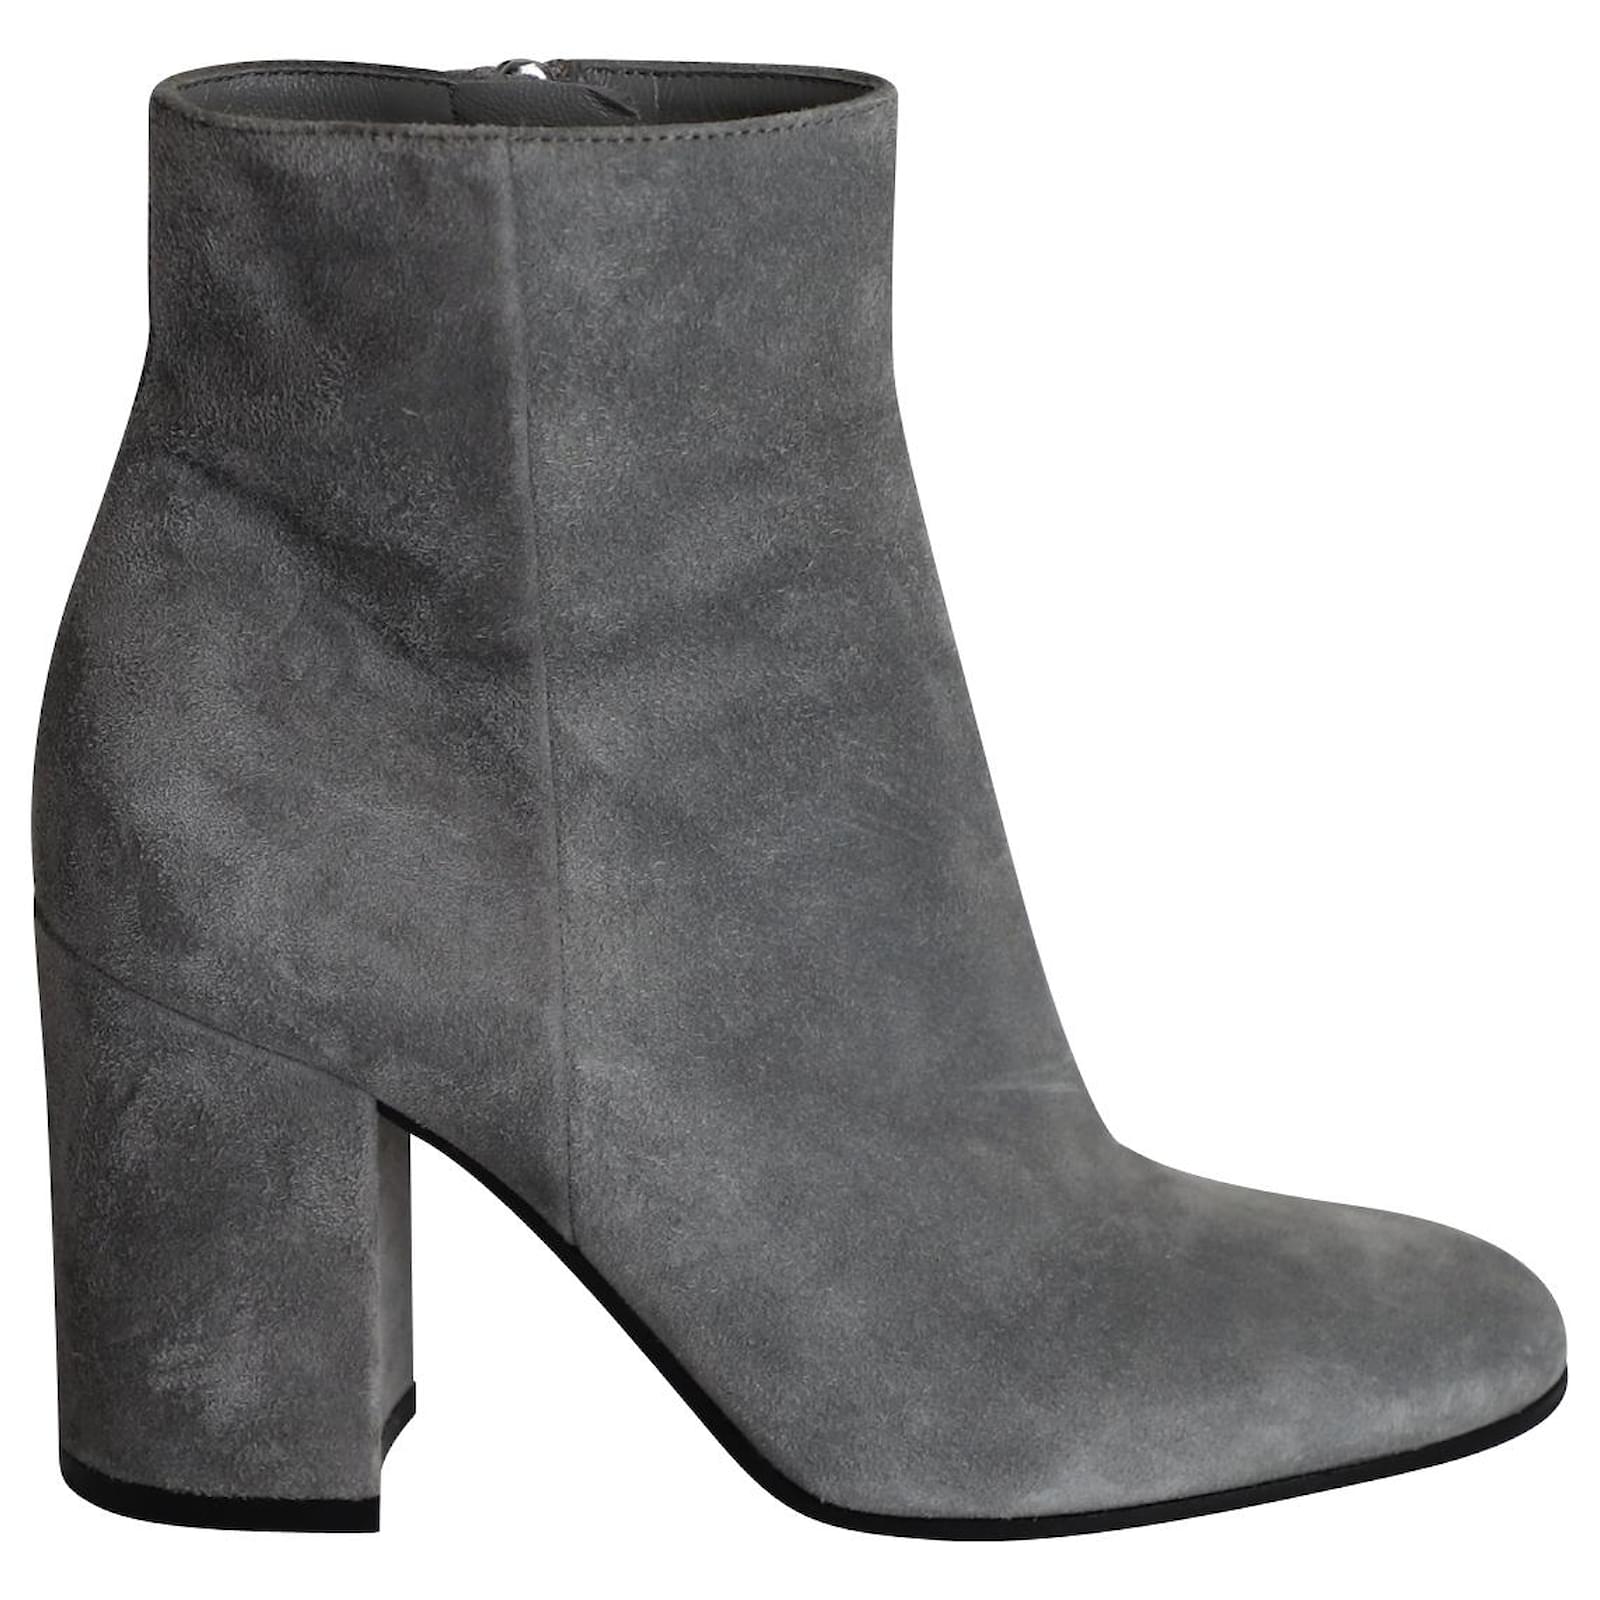 Gianvito Rossi Margaux Block-Heel Ankle Boots in Grey Suede